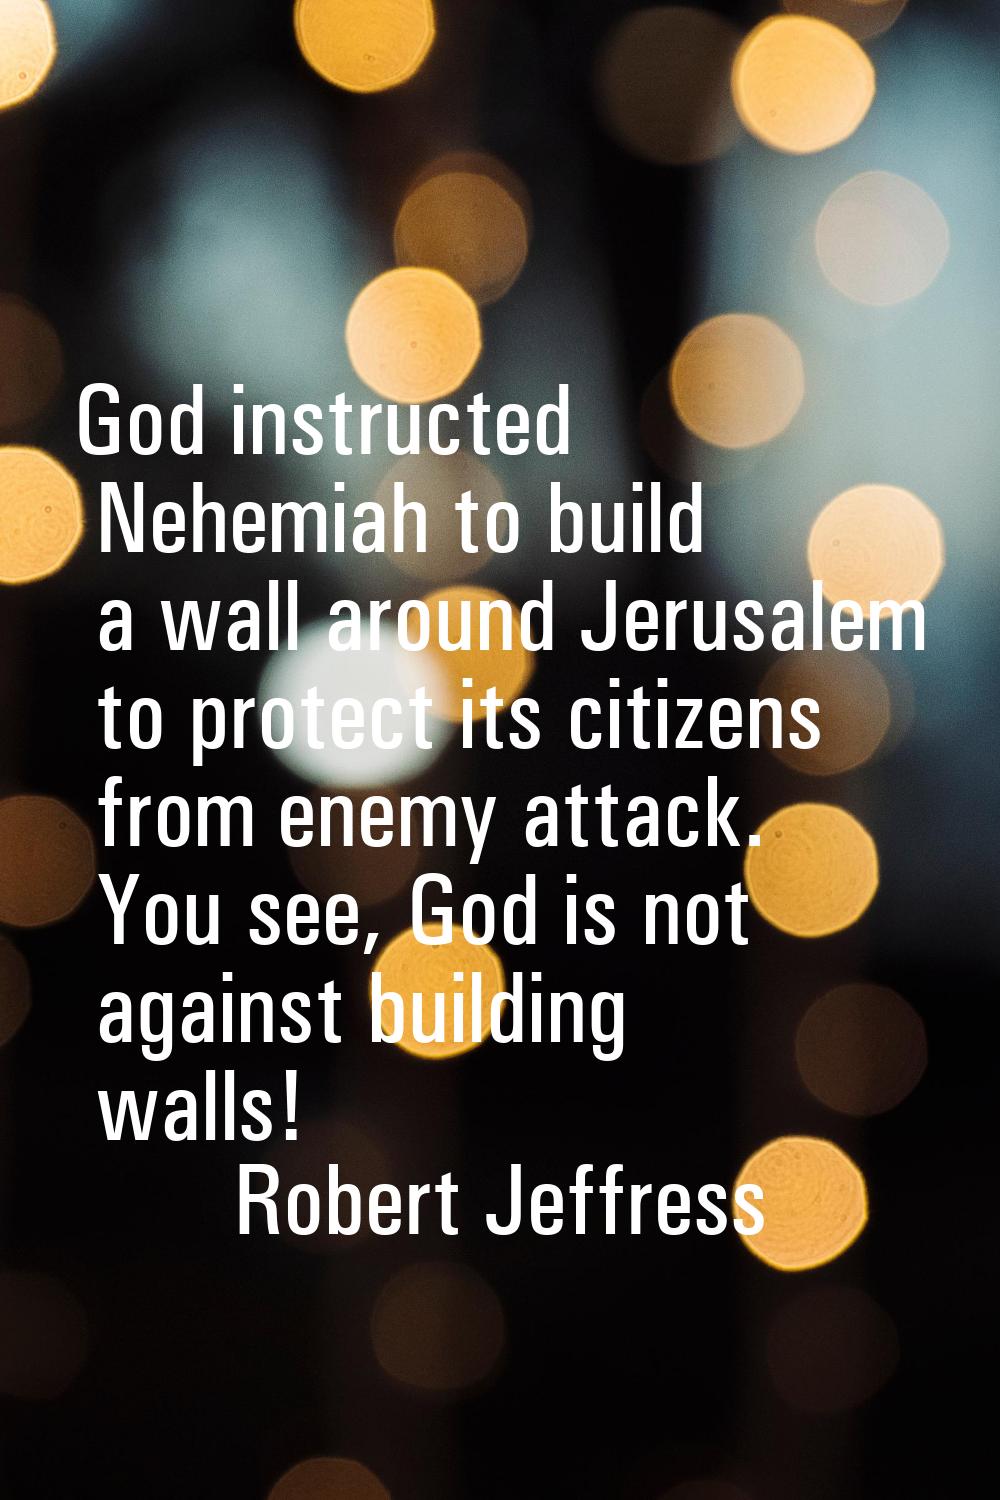 God instructed Nehemiah to build a wall around Jerusalem to protect its citizens from enemy attack.